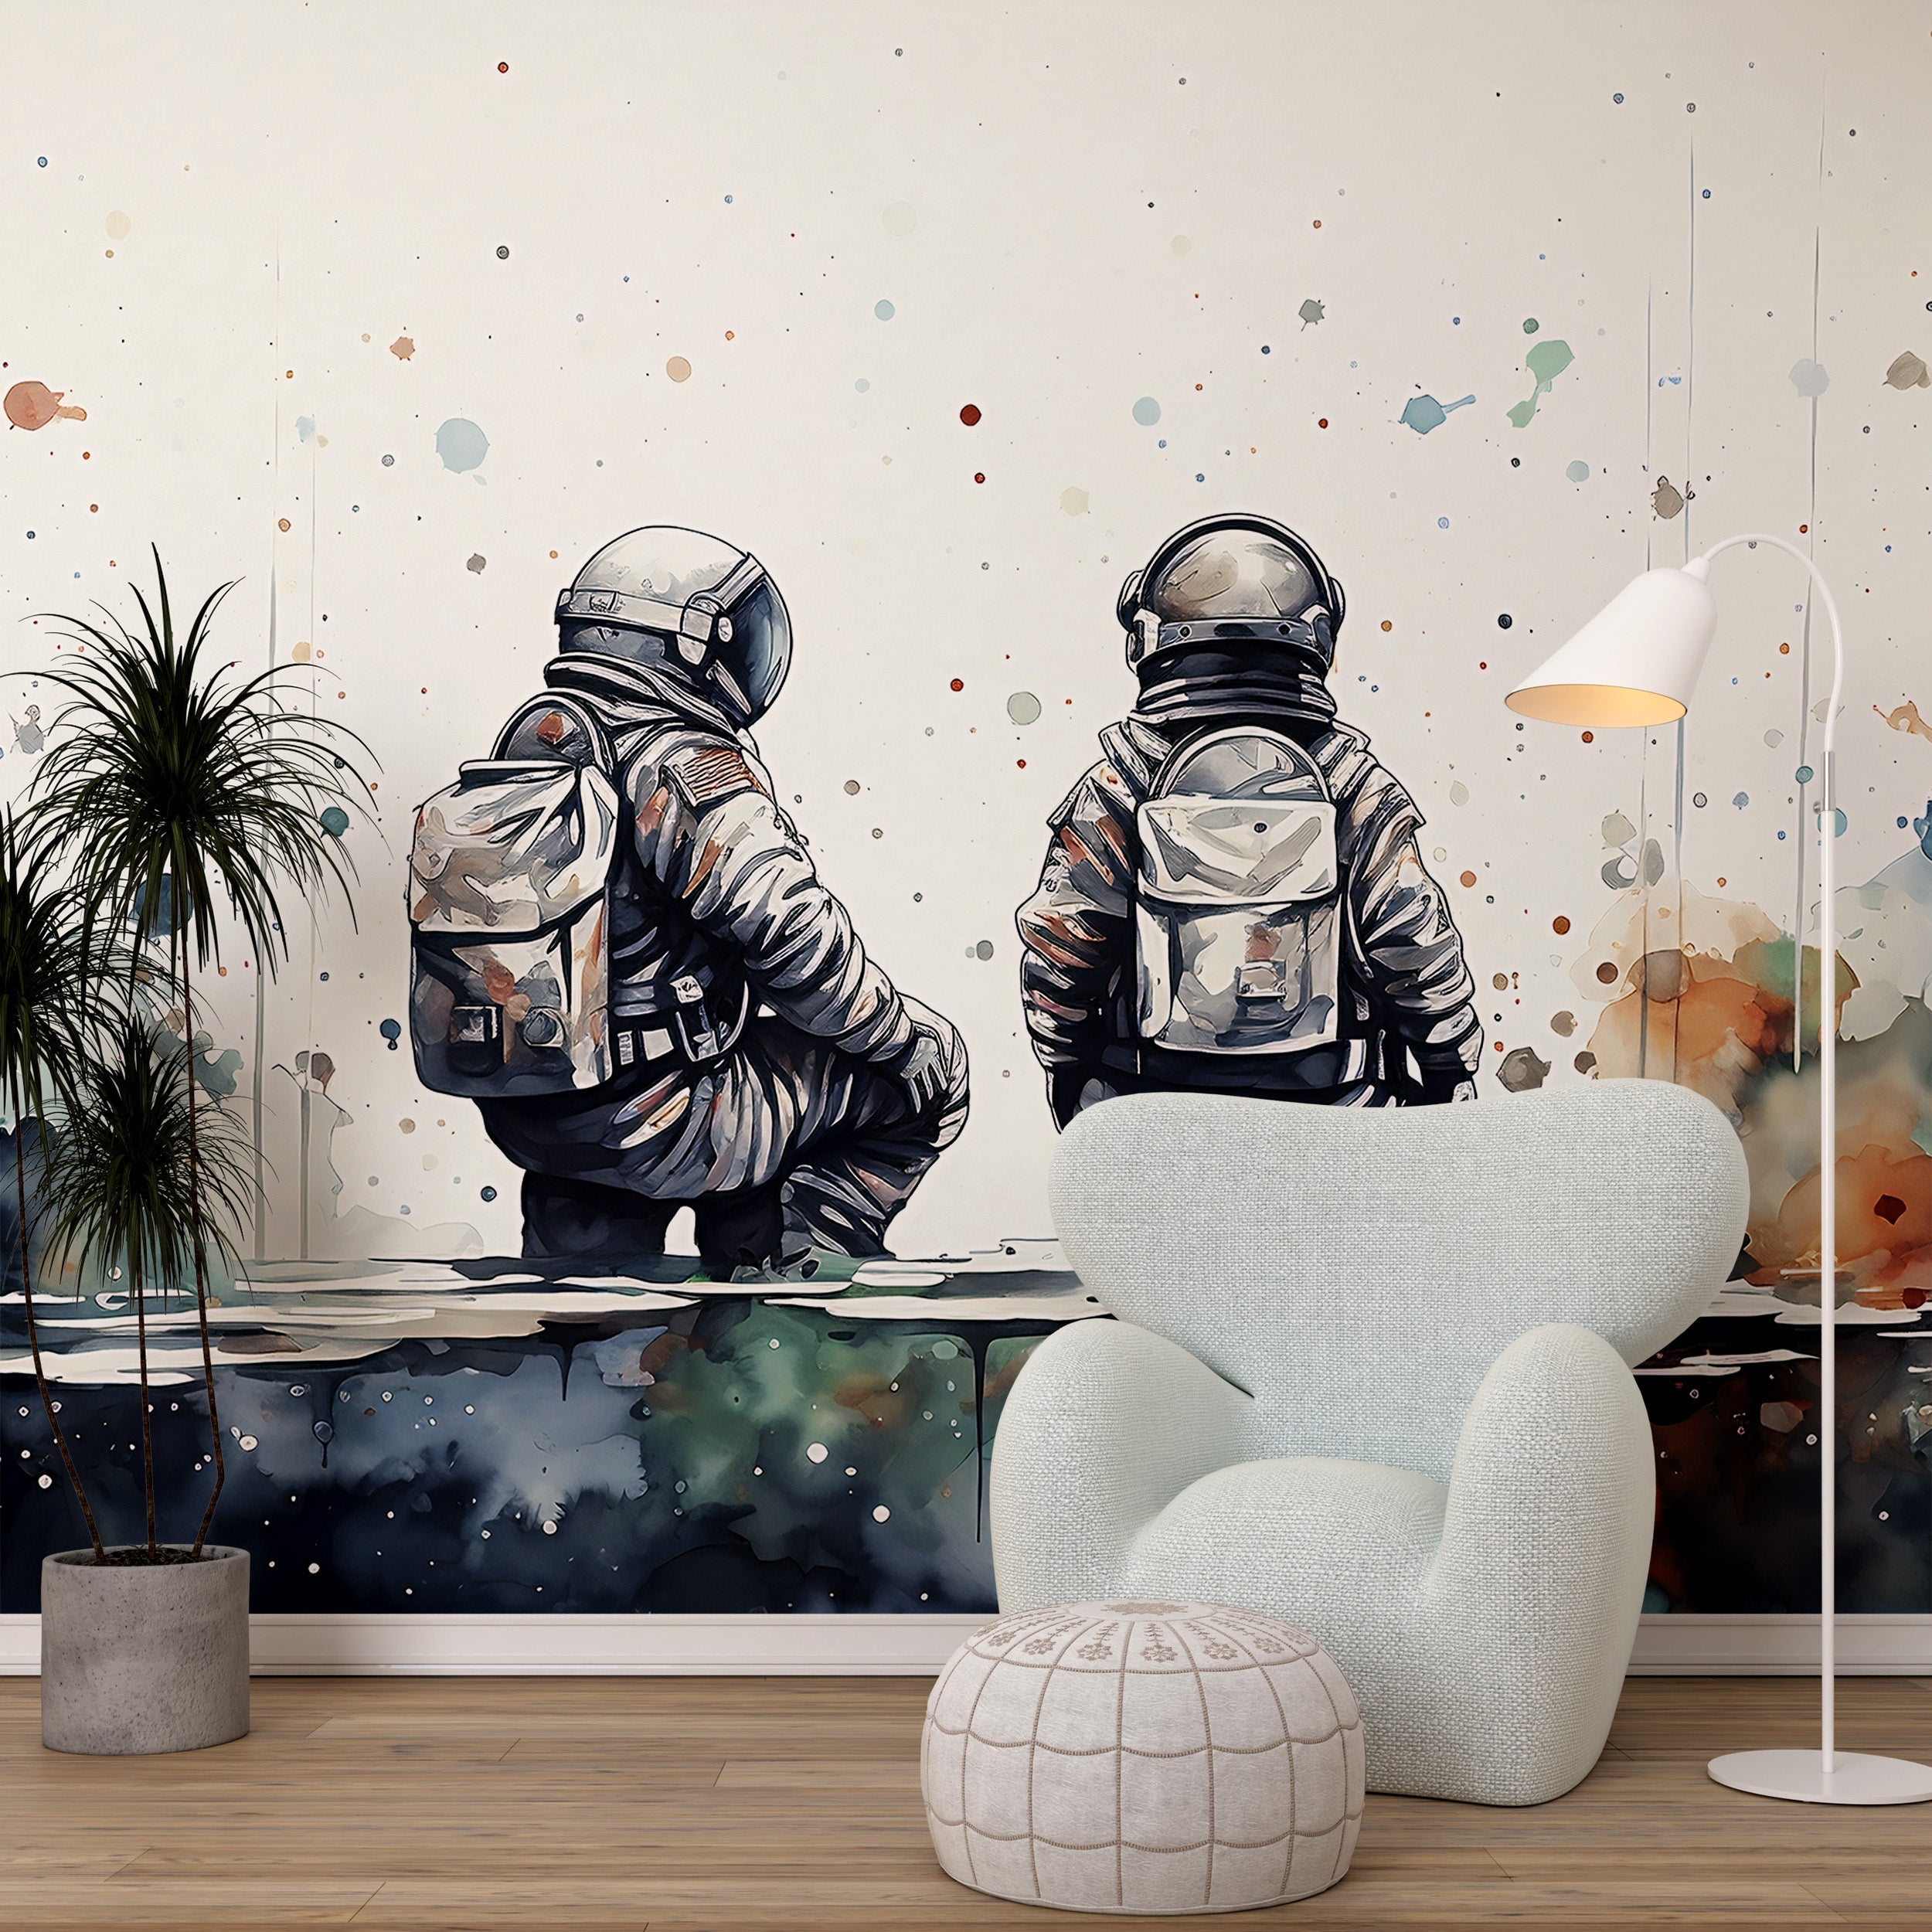 Astronaut Wall Decal Detail in Kids' Room